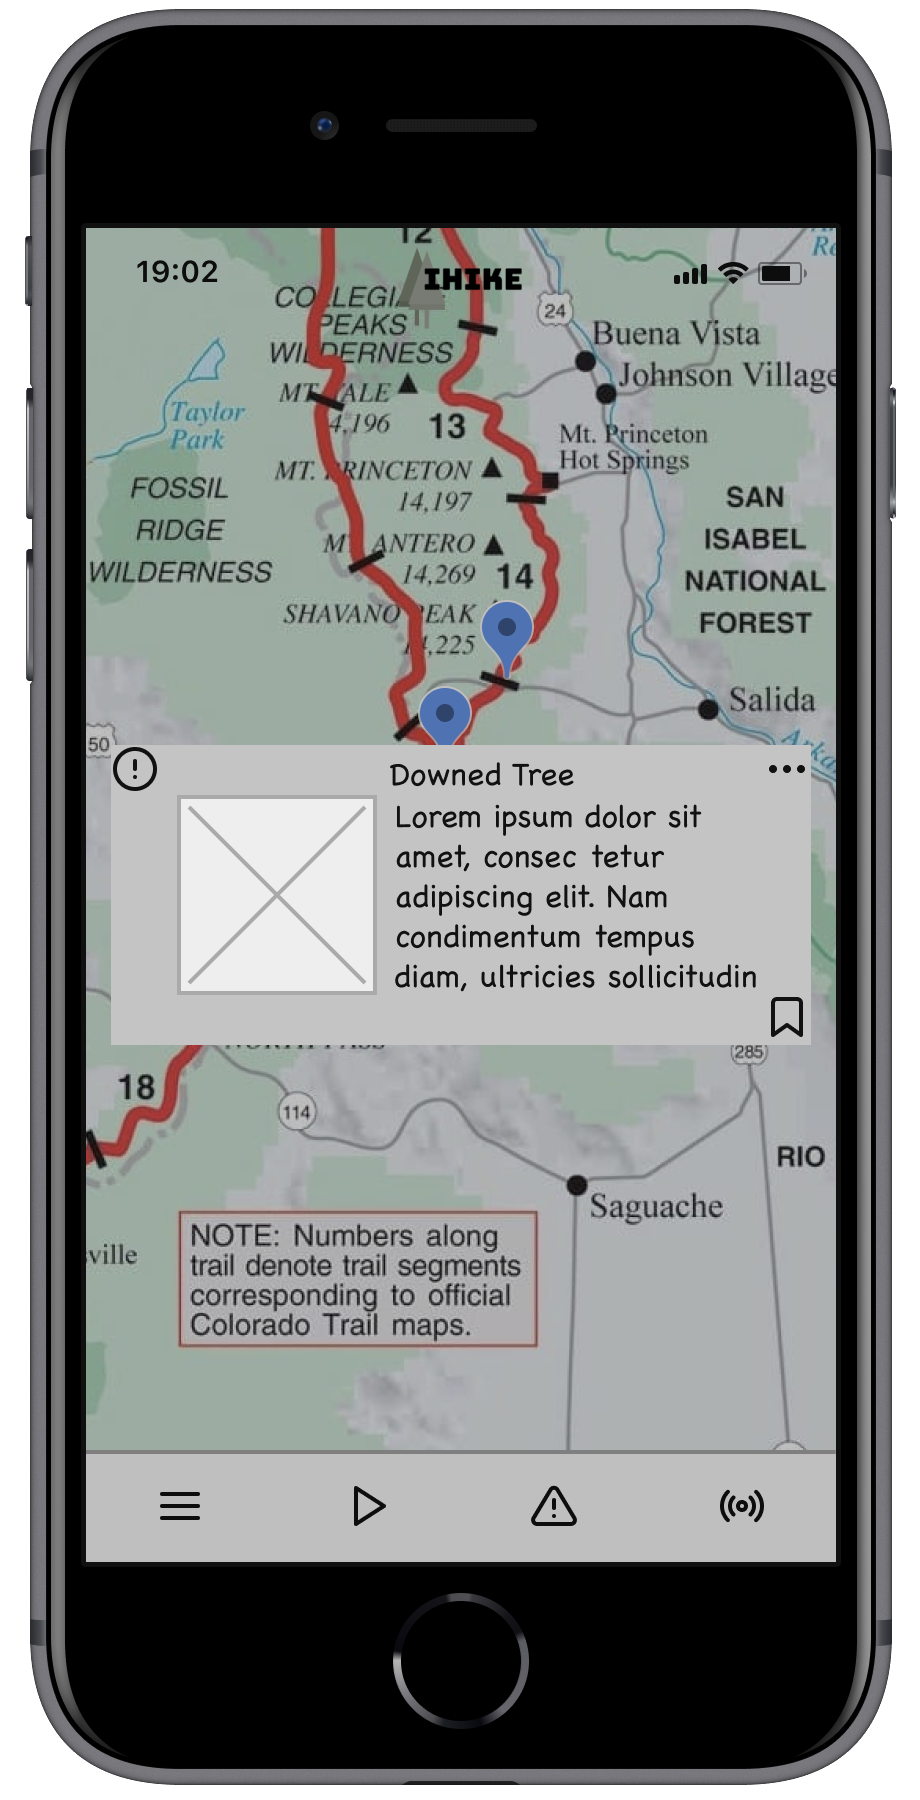 trail-report-from-map.png